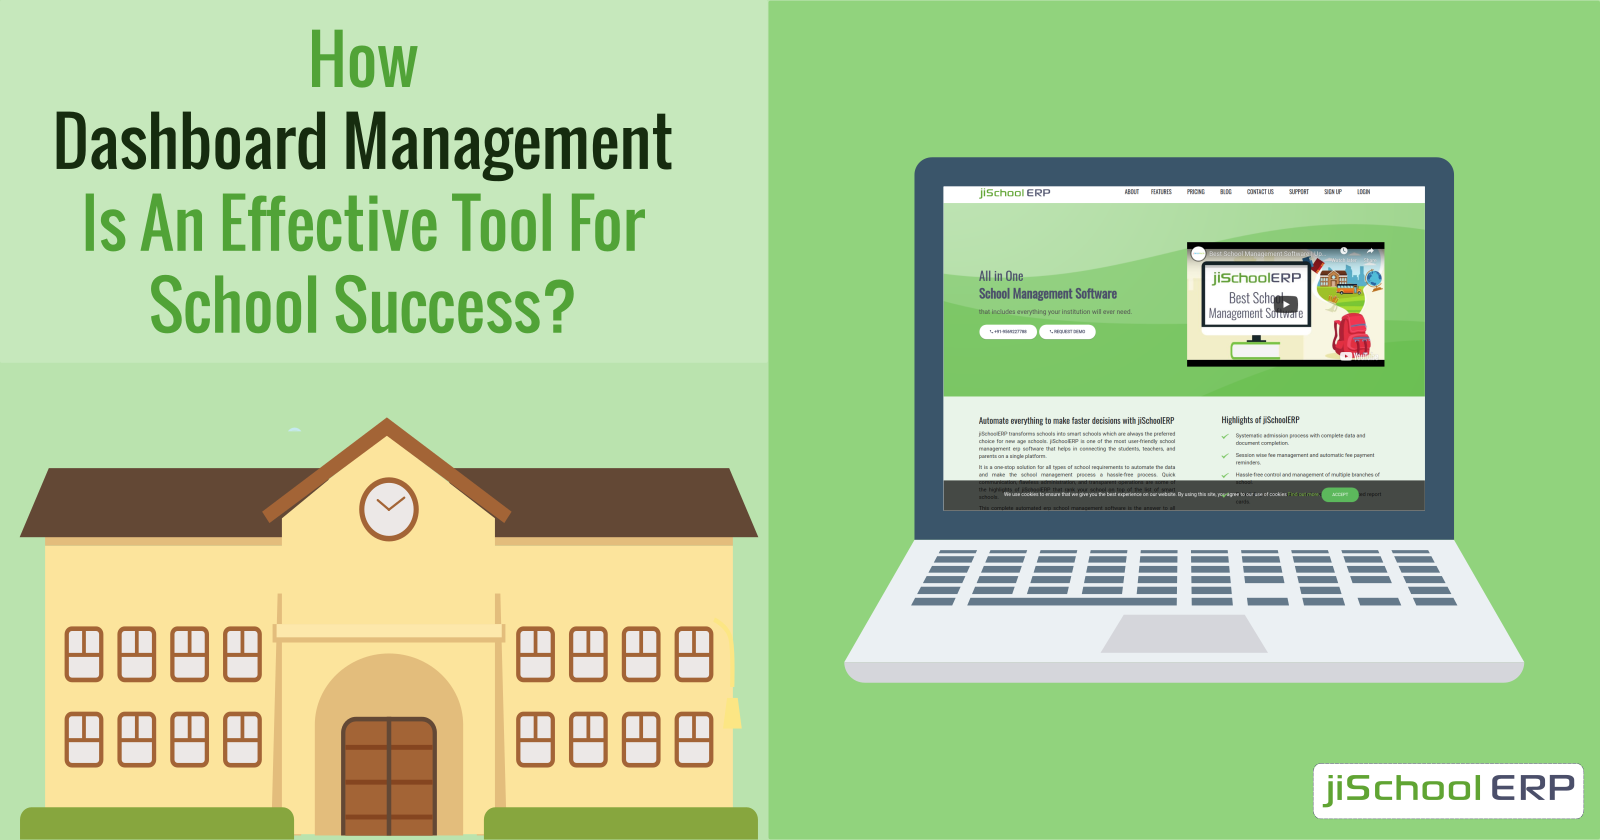 How Dashboard Management Is An Effective Tool for School Success?